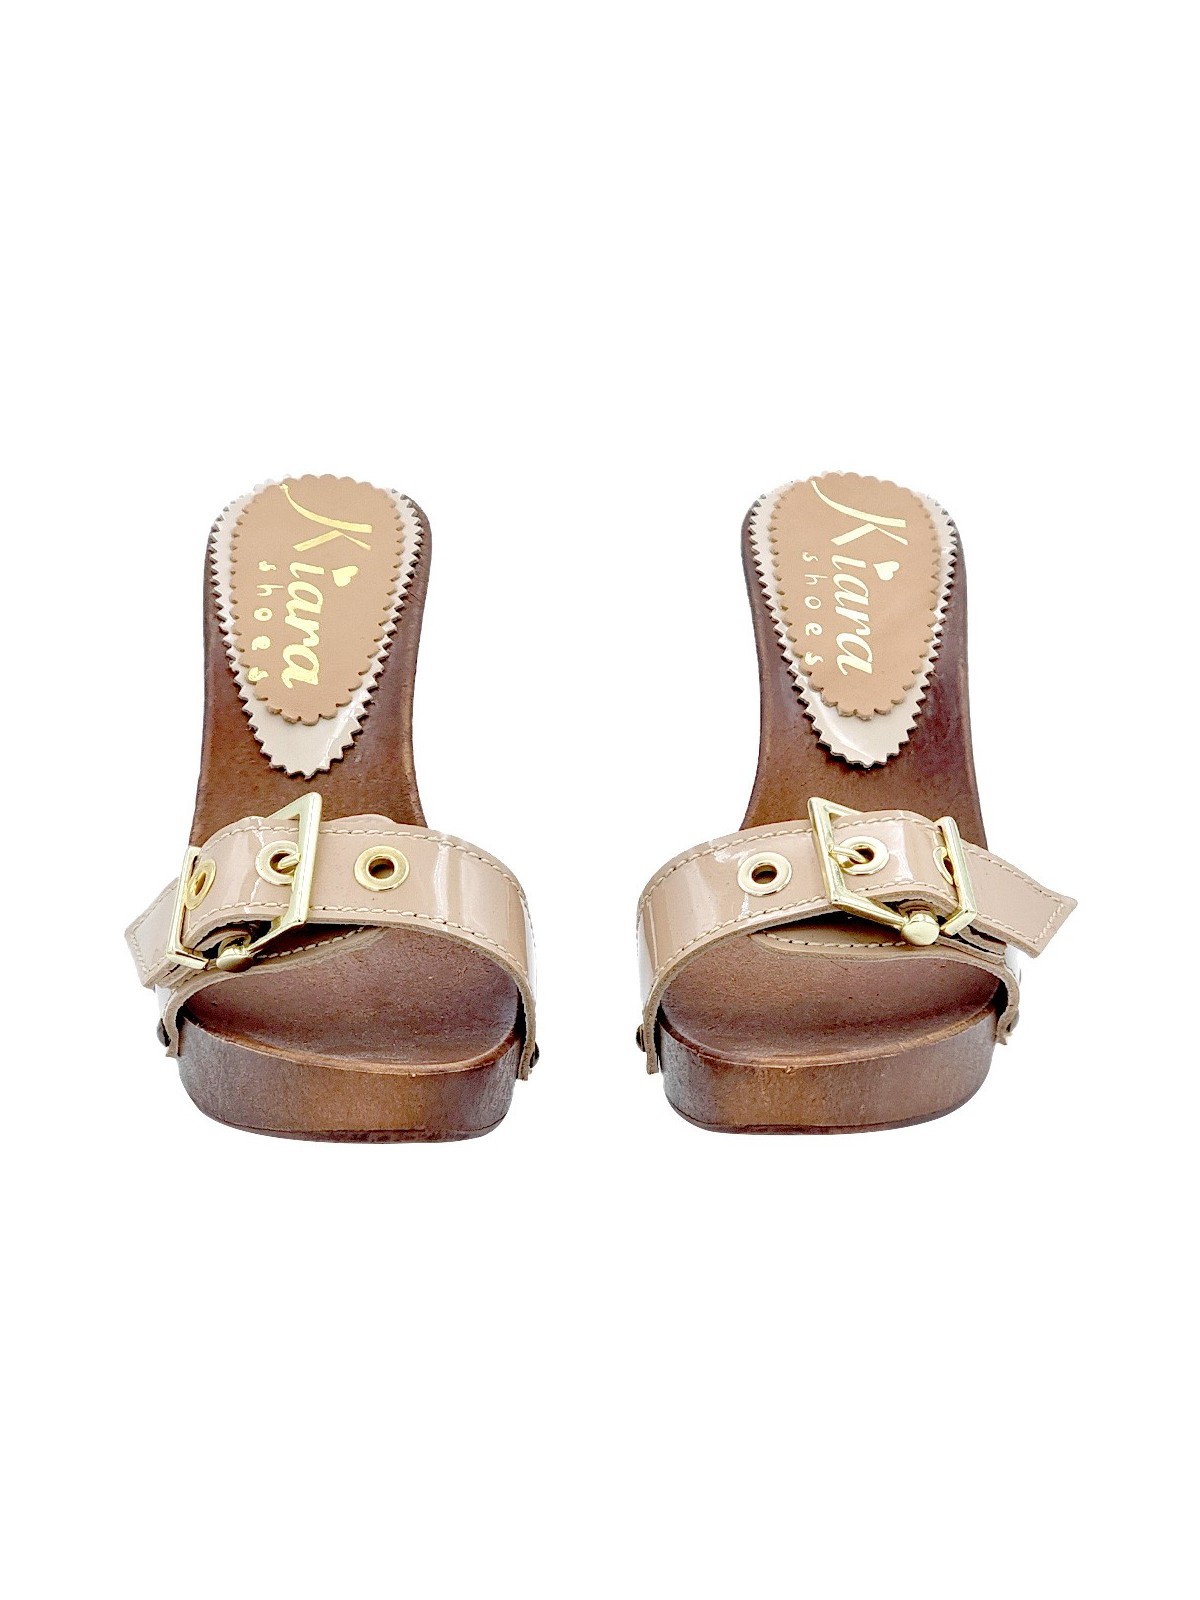 CLOGS IN BEIGE PATENT LEATHER WITH BUCKLE